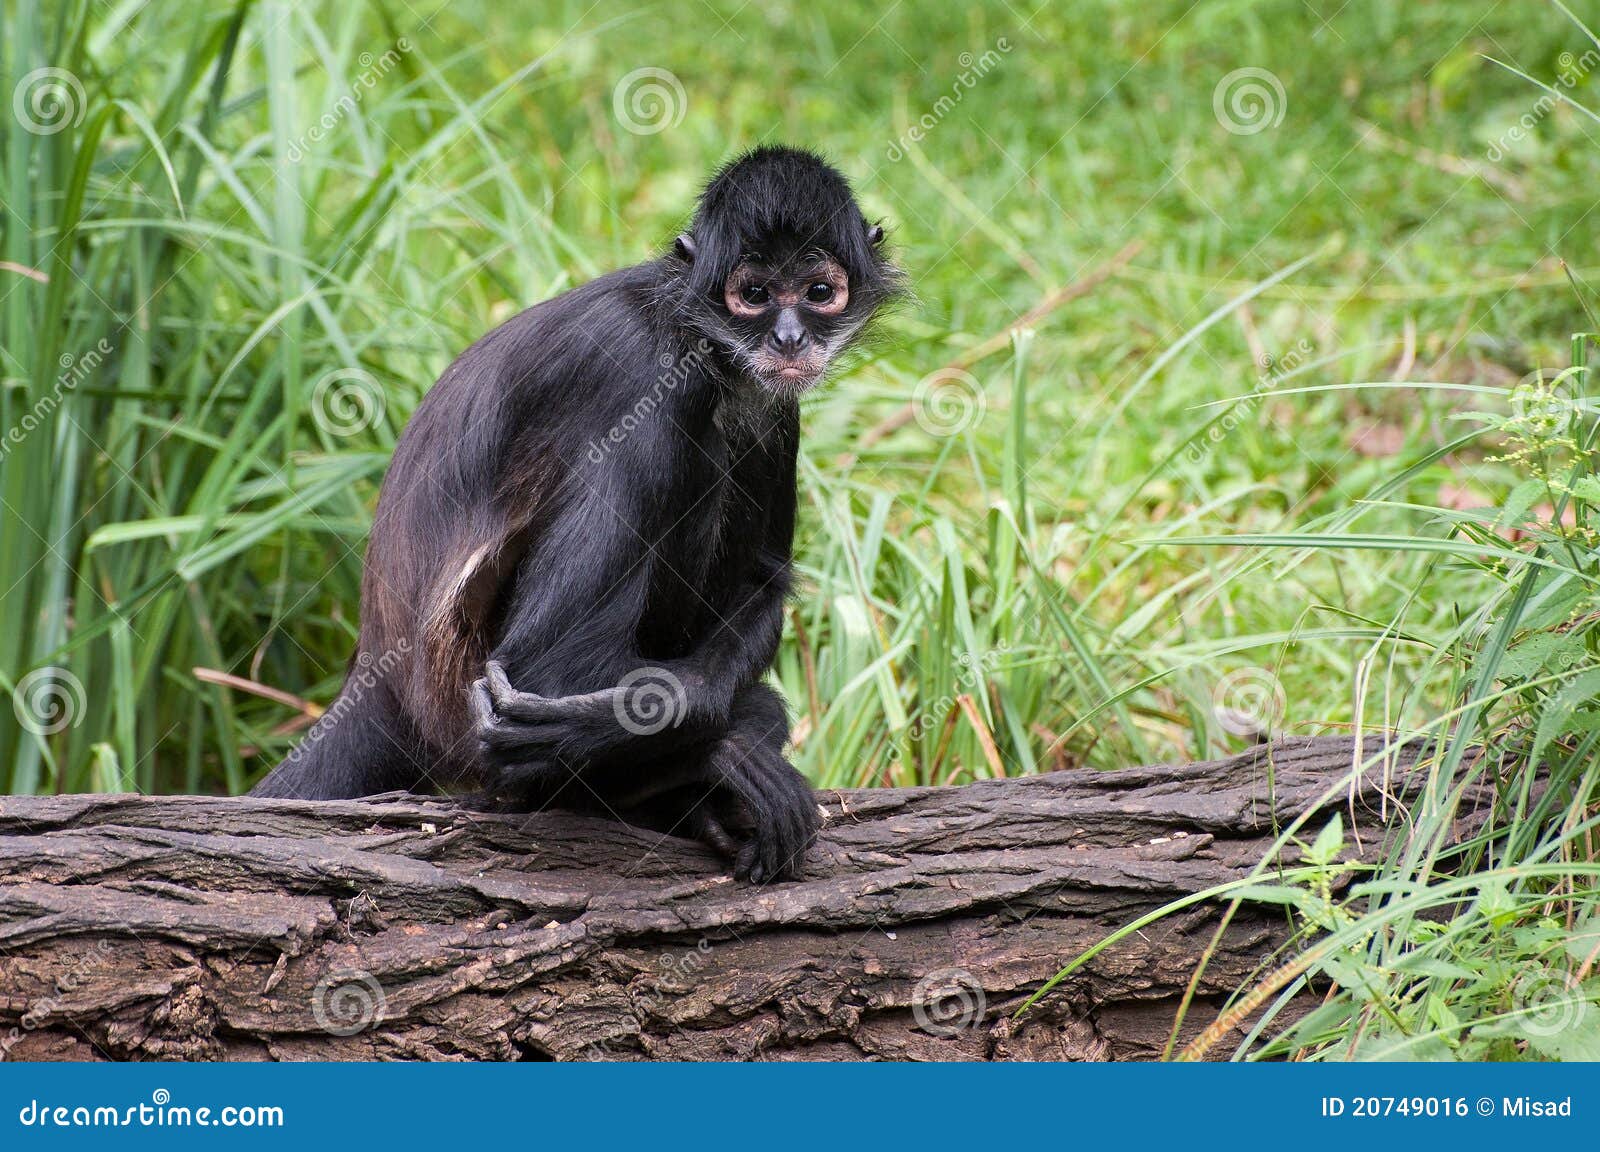 Mexican spider monkey stock photo. Image of long, party - 20749016